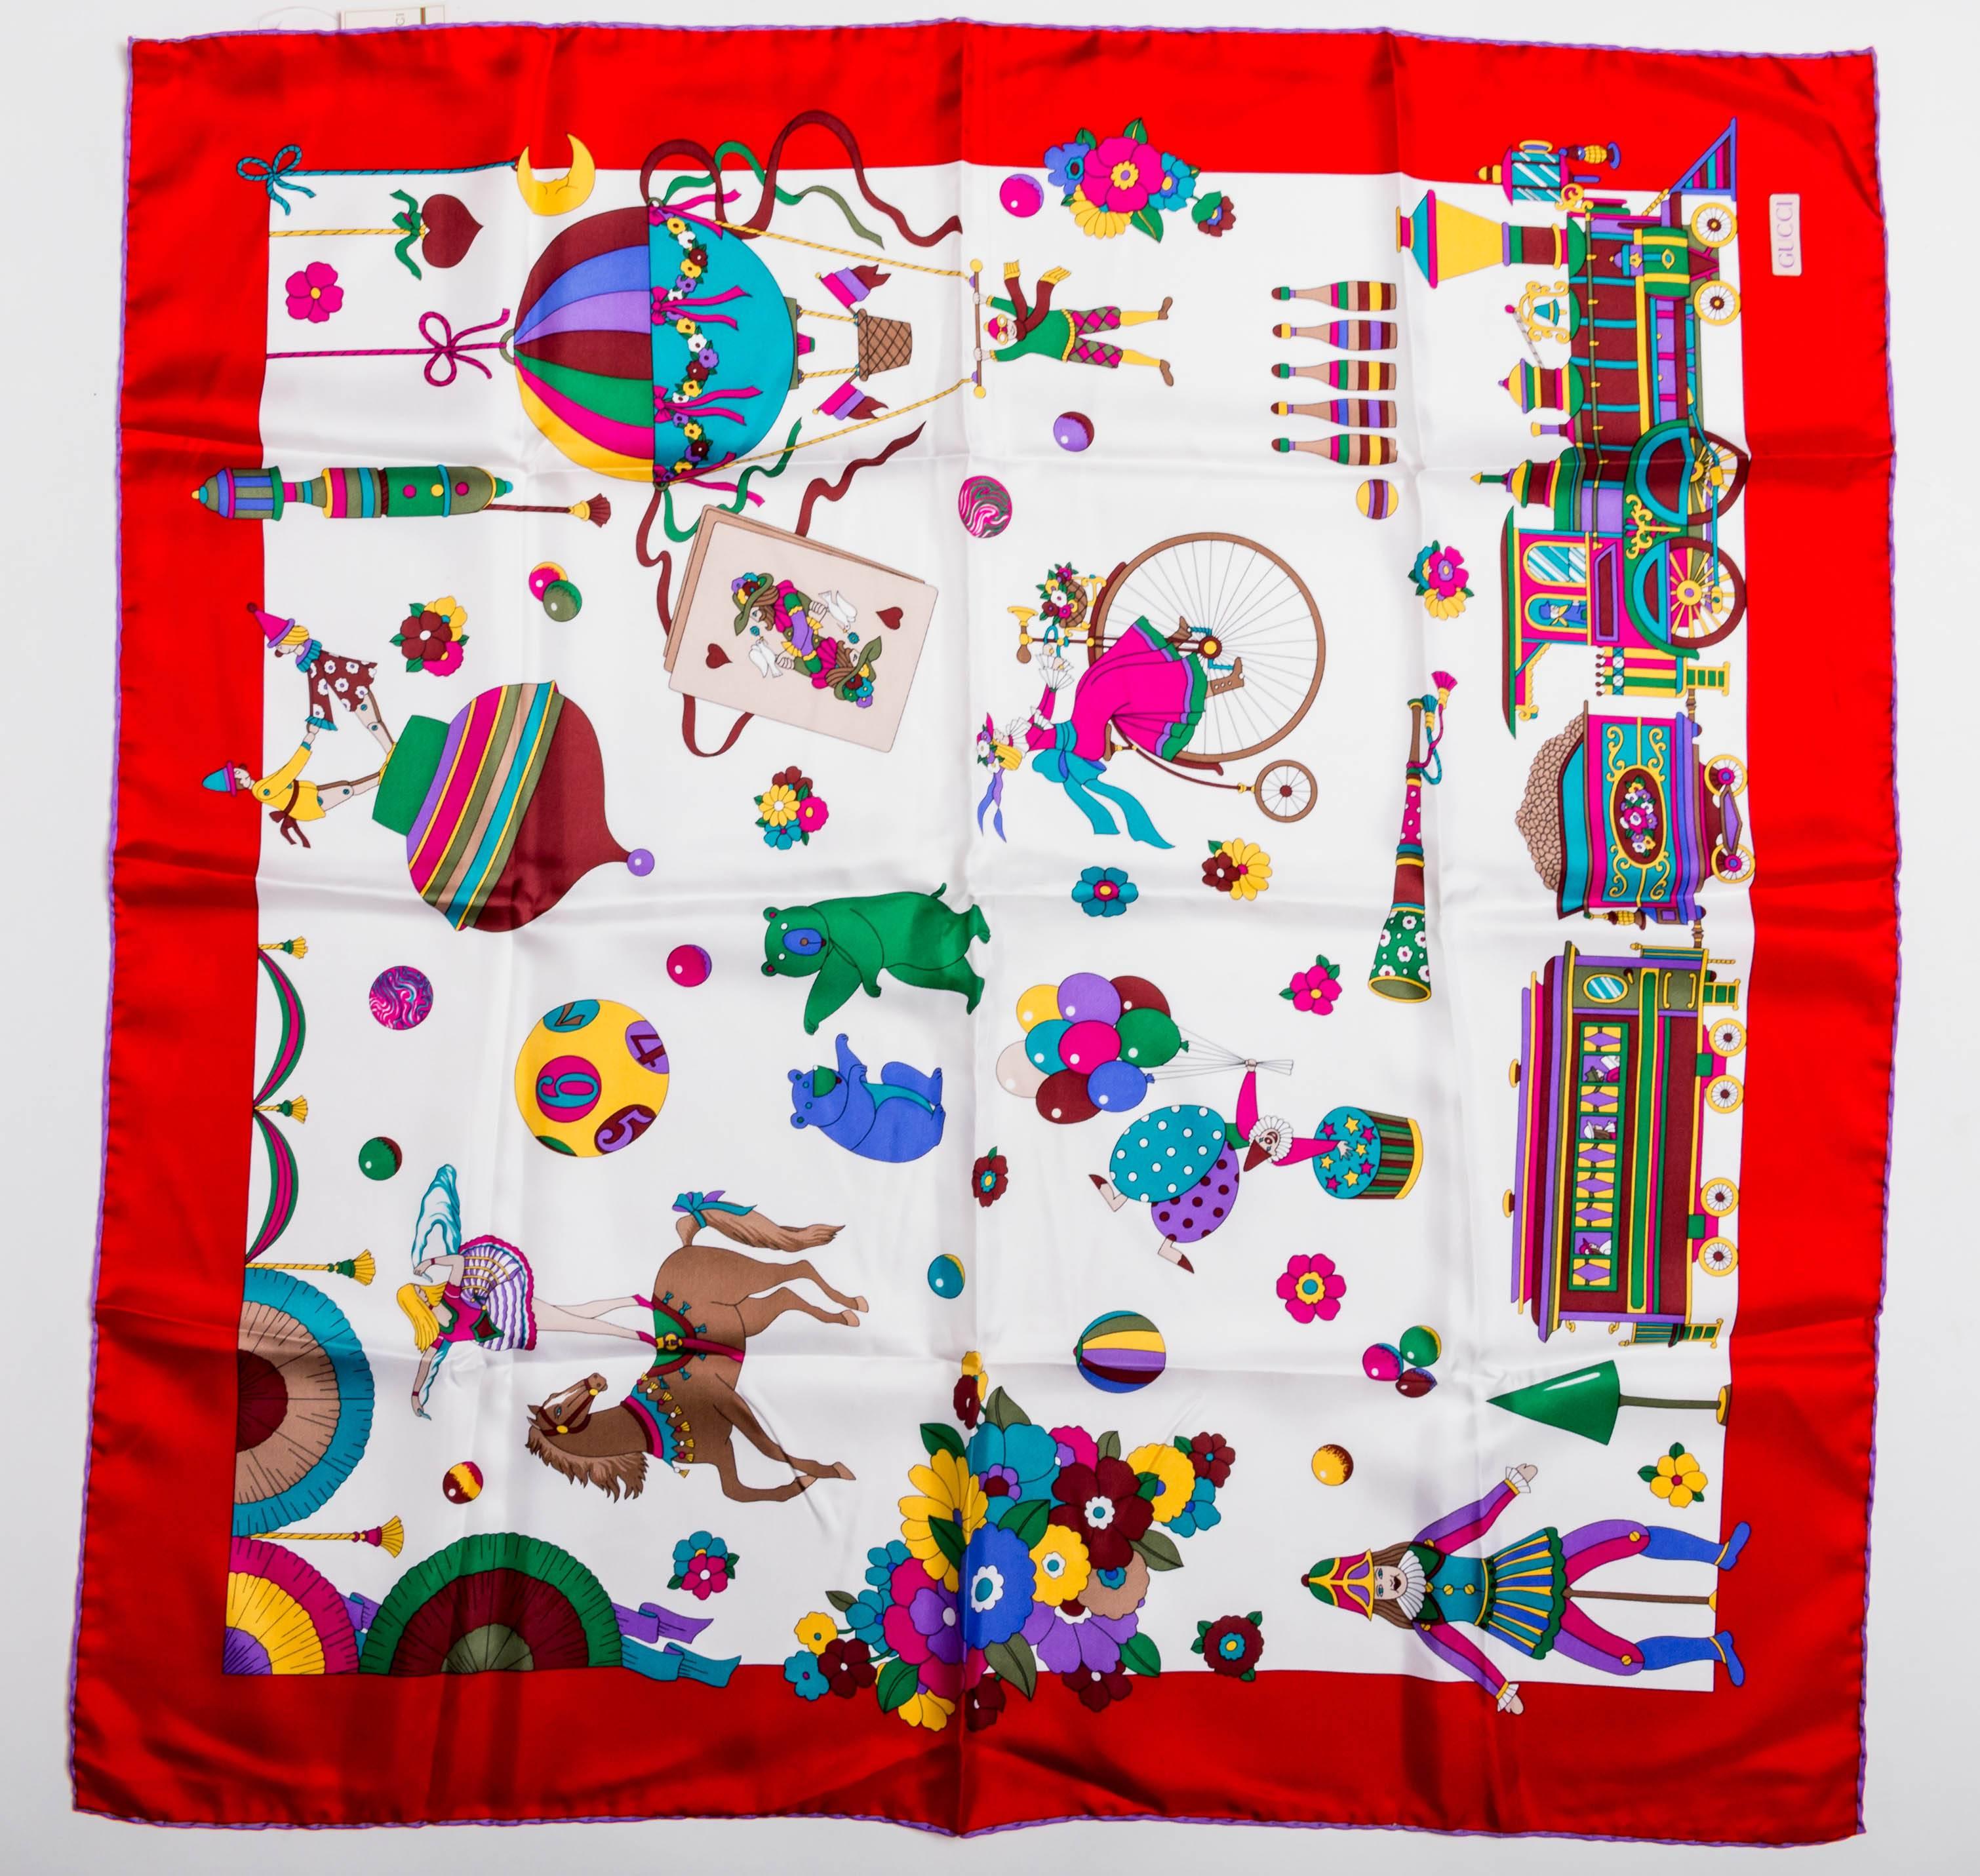 Red borders with a rolled hem in purple surround a circus themed scarf. Whimsical horses, bears and flowers in vibrant shades of blue and red on a background of white make this scarf quite outstanding.